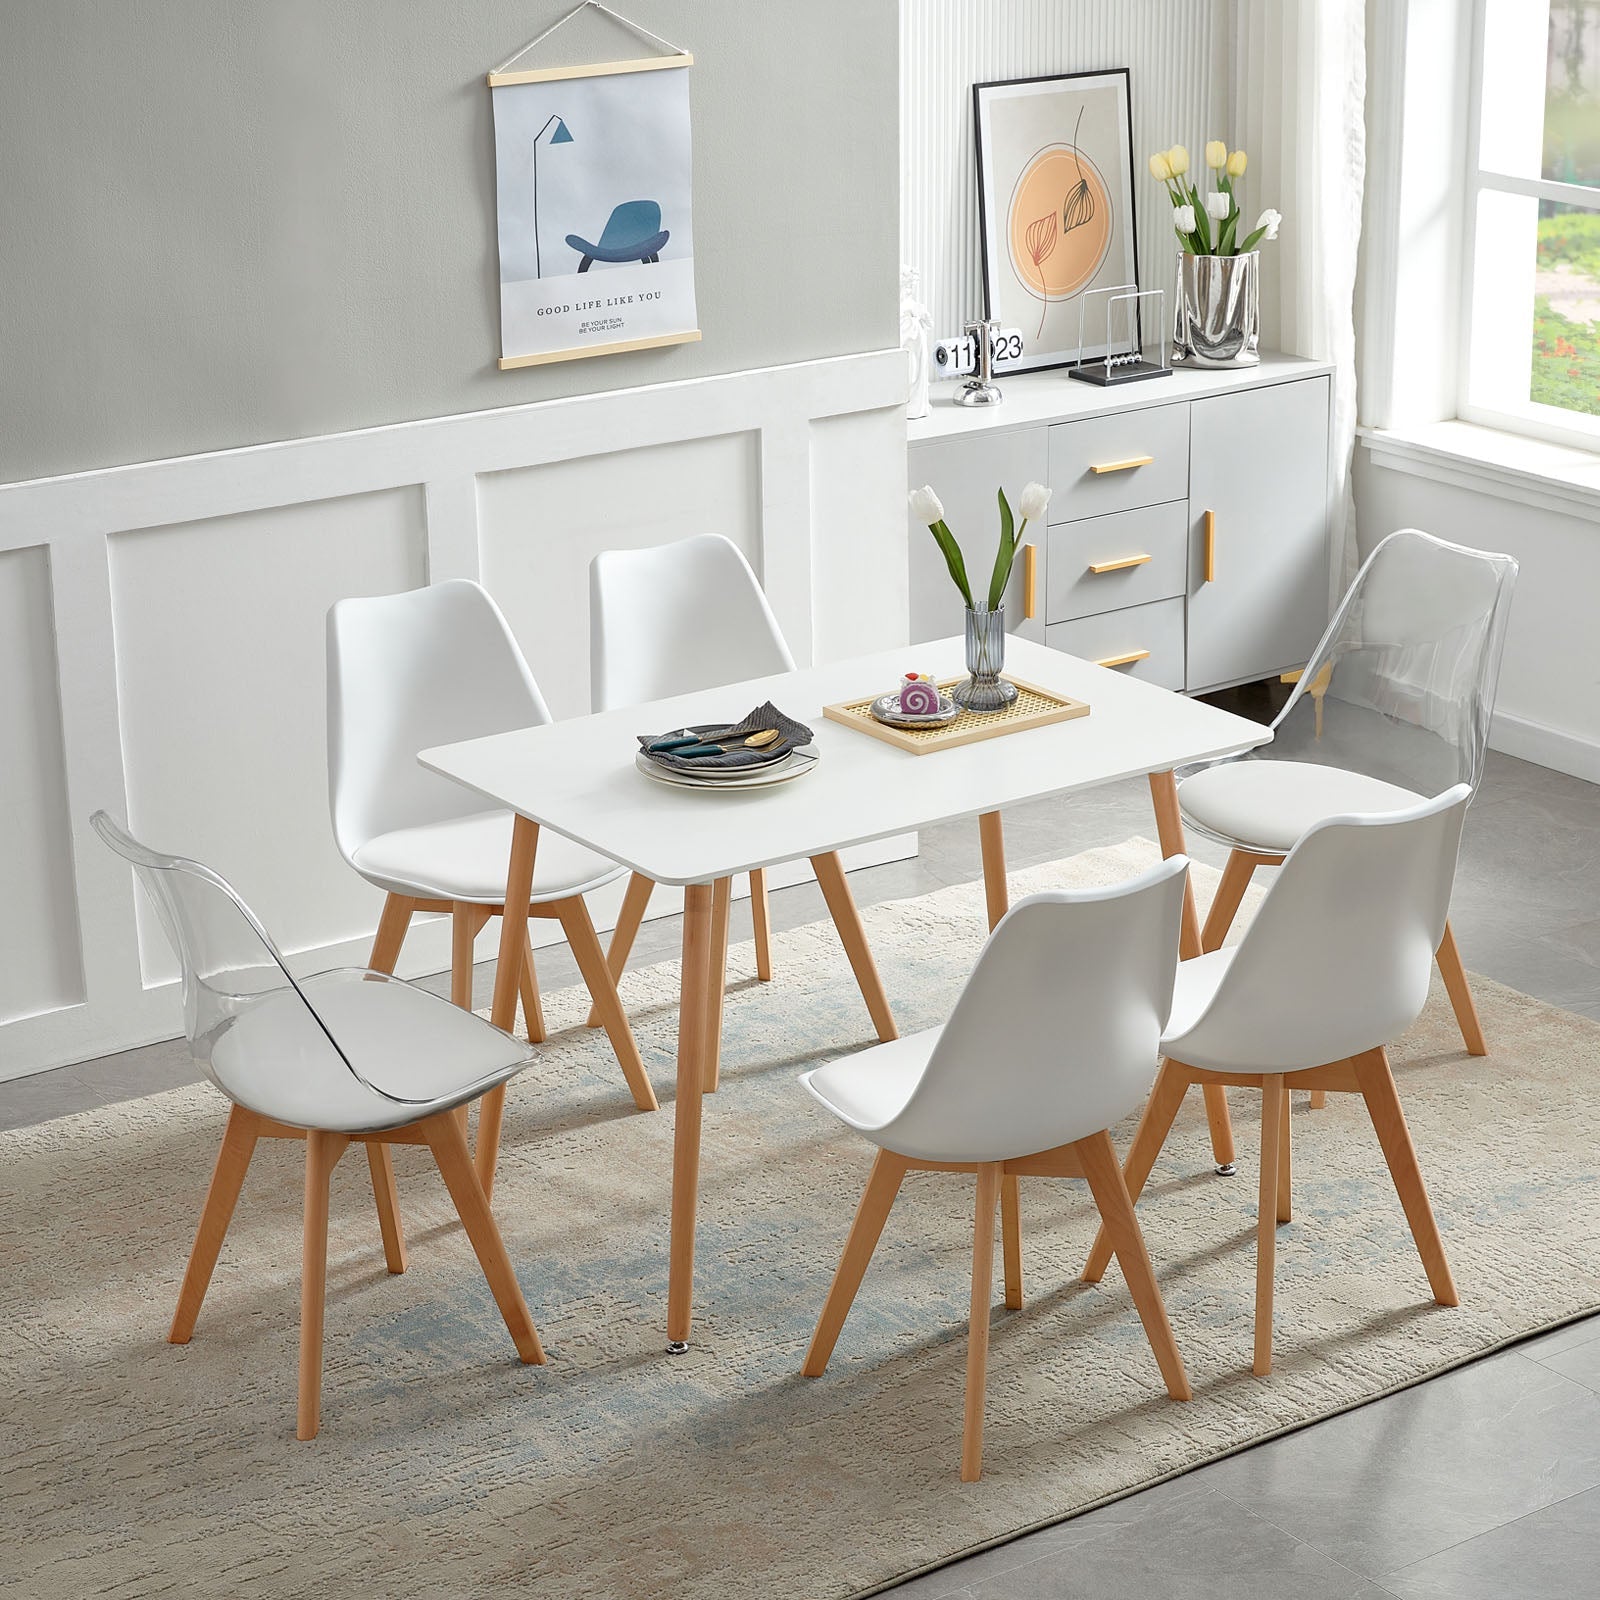 TULIP PP Dining Chairs with Beech Legs Scandinavian design Upholstered Chairs - White and Transparent